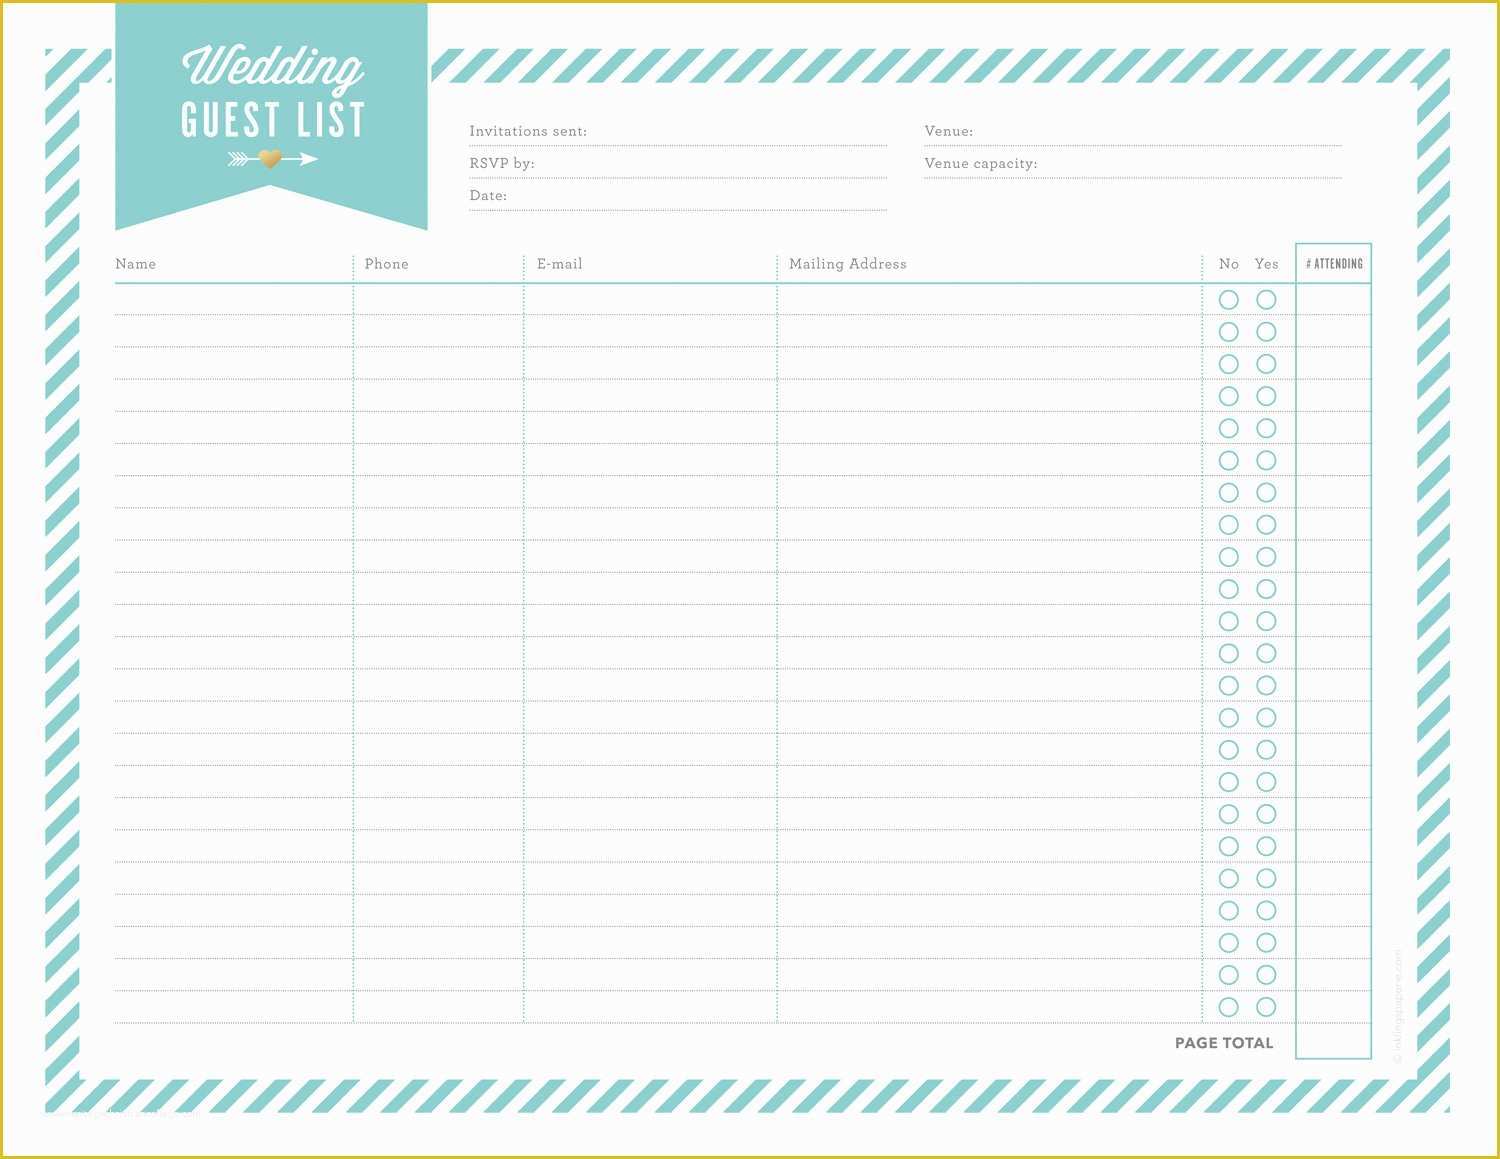 Free Wedding Guest List Template Of Free Wedding Planning Printables & Checklists